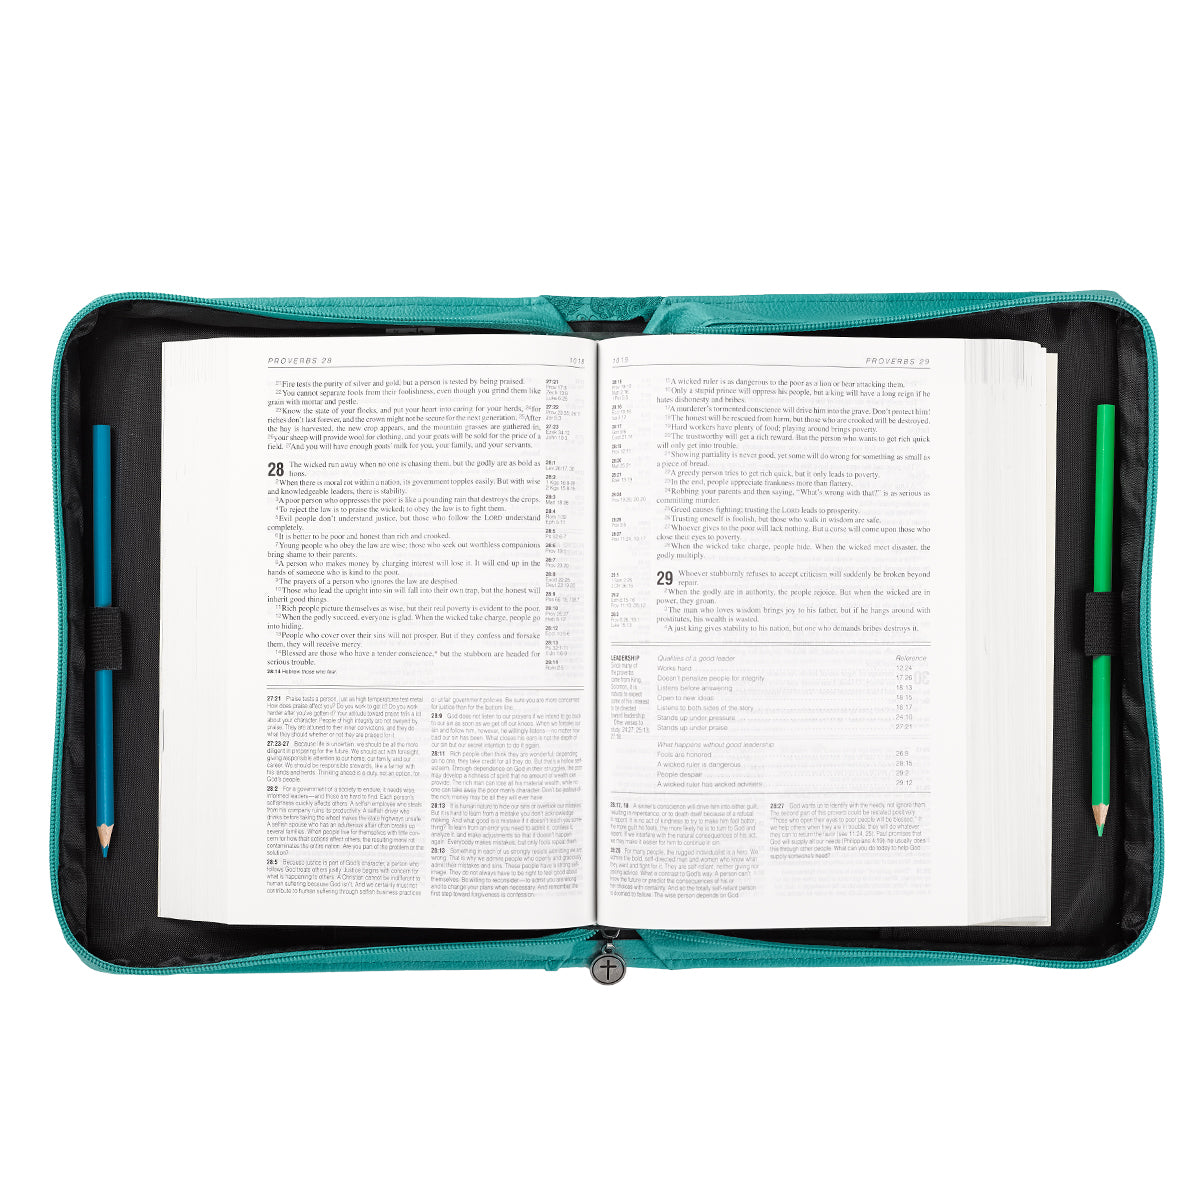 Everlasting Love Turquoise Faux Leather Fashion Bible Cover - Jeremiah 31:3 - The Christian Gift Company